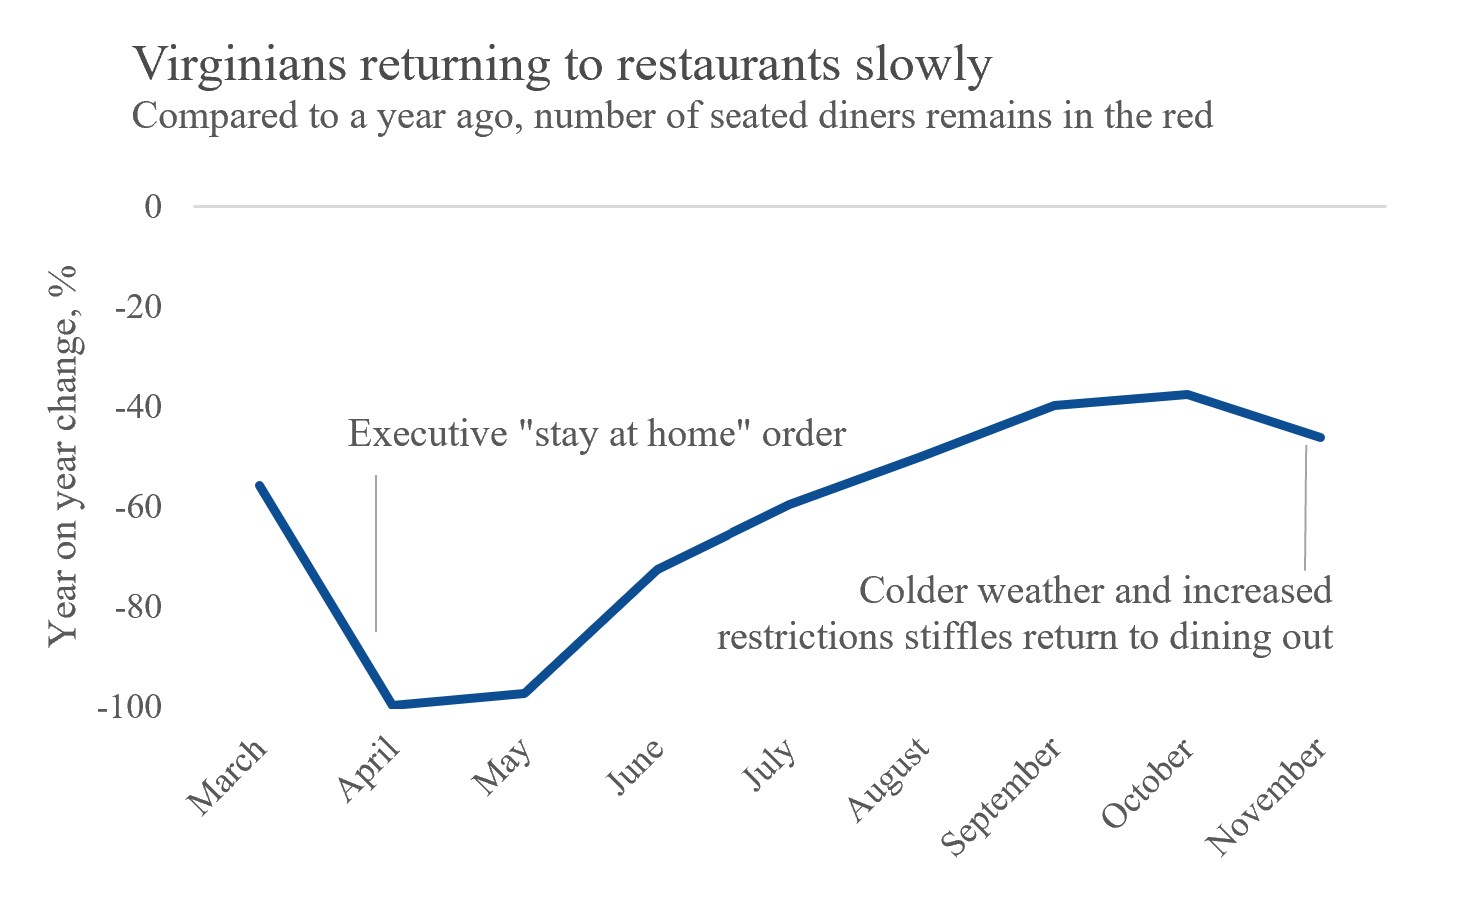 Figure 2. Seated diners in Virginia, March-November 2020 (Source: OpenTable.com)